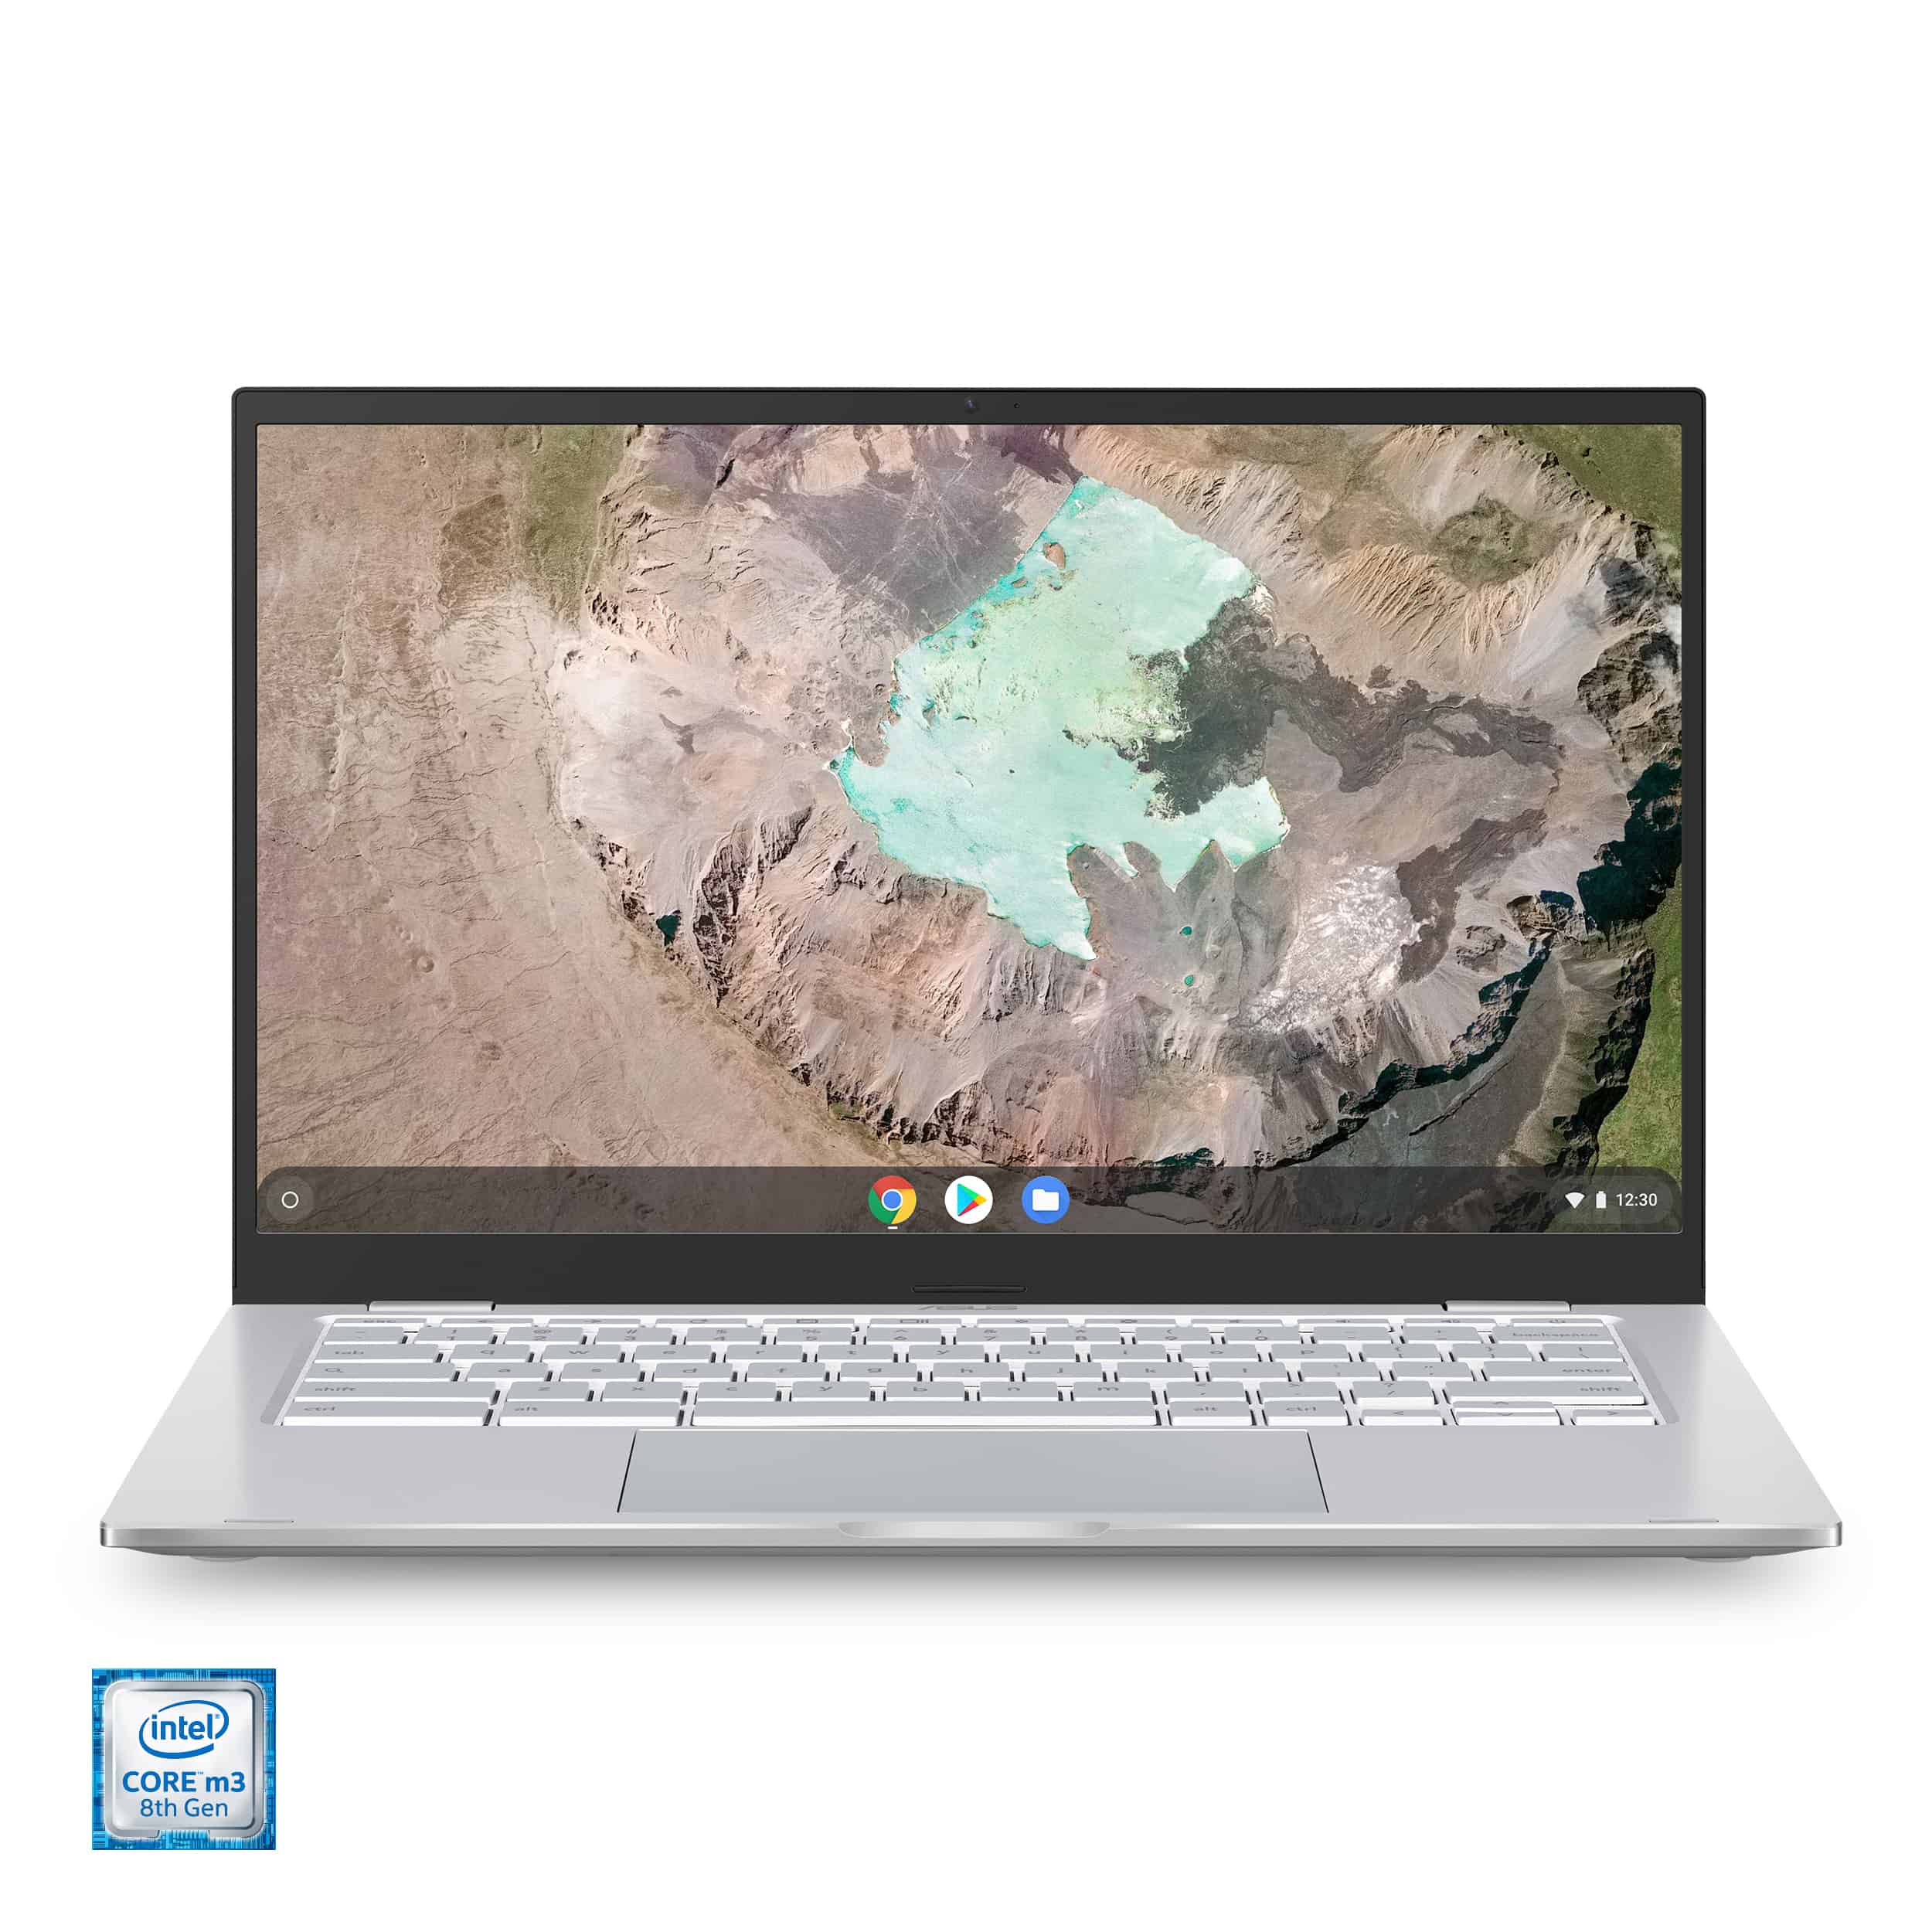 ASUS Chromebook C425 Clamshell Laptop, 14″ FHD ONLY $279 (Reg $449)